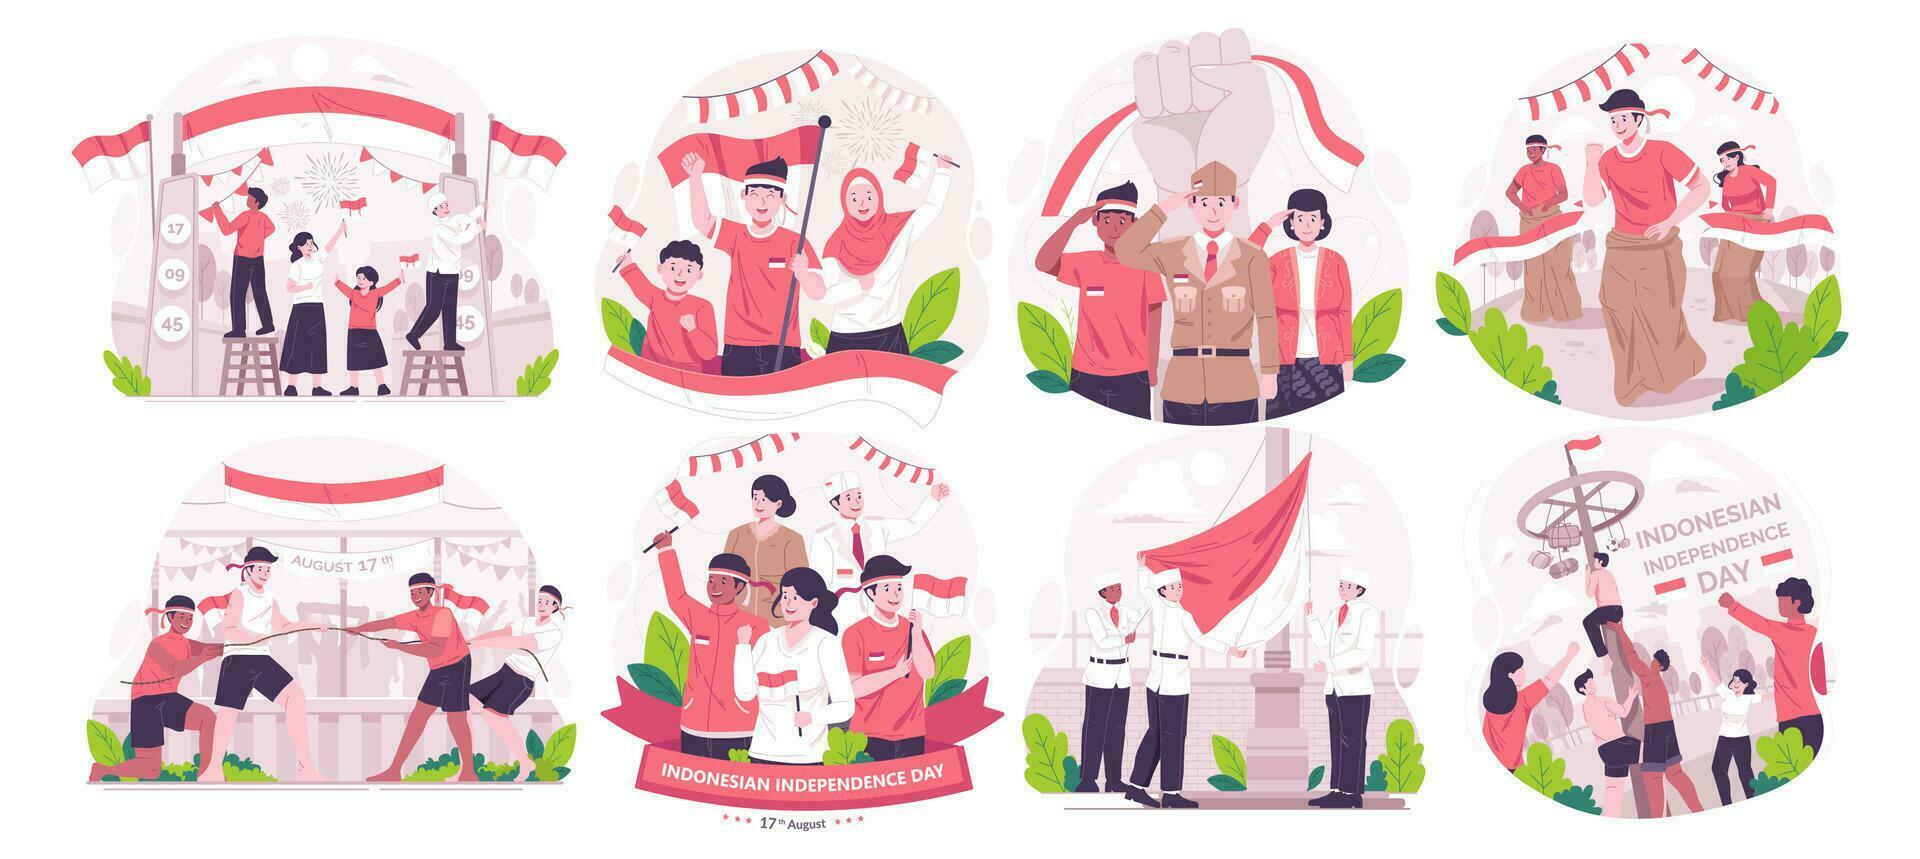 Illustration Set of People celebrate Indonesia's Independence Day by holding the red and white Indonesian flag. Indonesia Independence Day on August 17th Concept vector